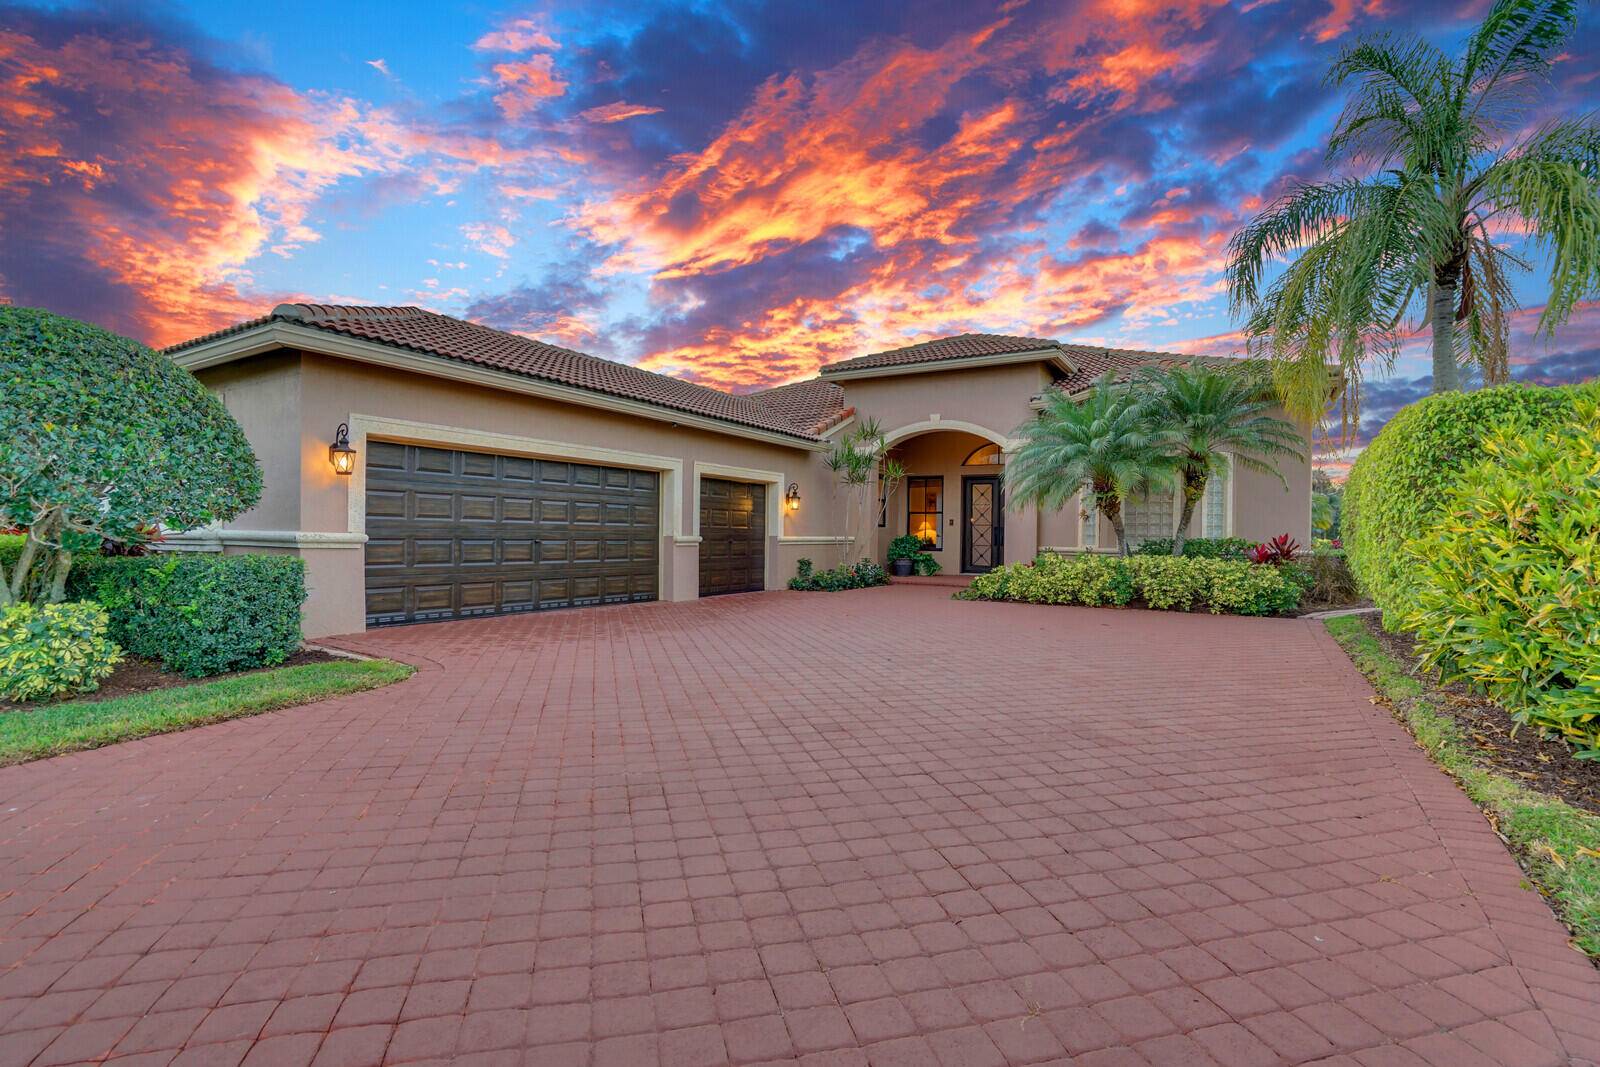 This gorgeous single story home located in the coveted gated club community of The Preserve at Ironhorse offers breathtaking tree lined views of the golf course with no other homes ...